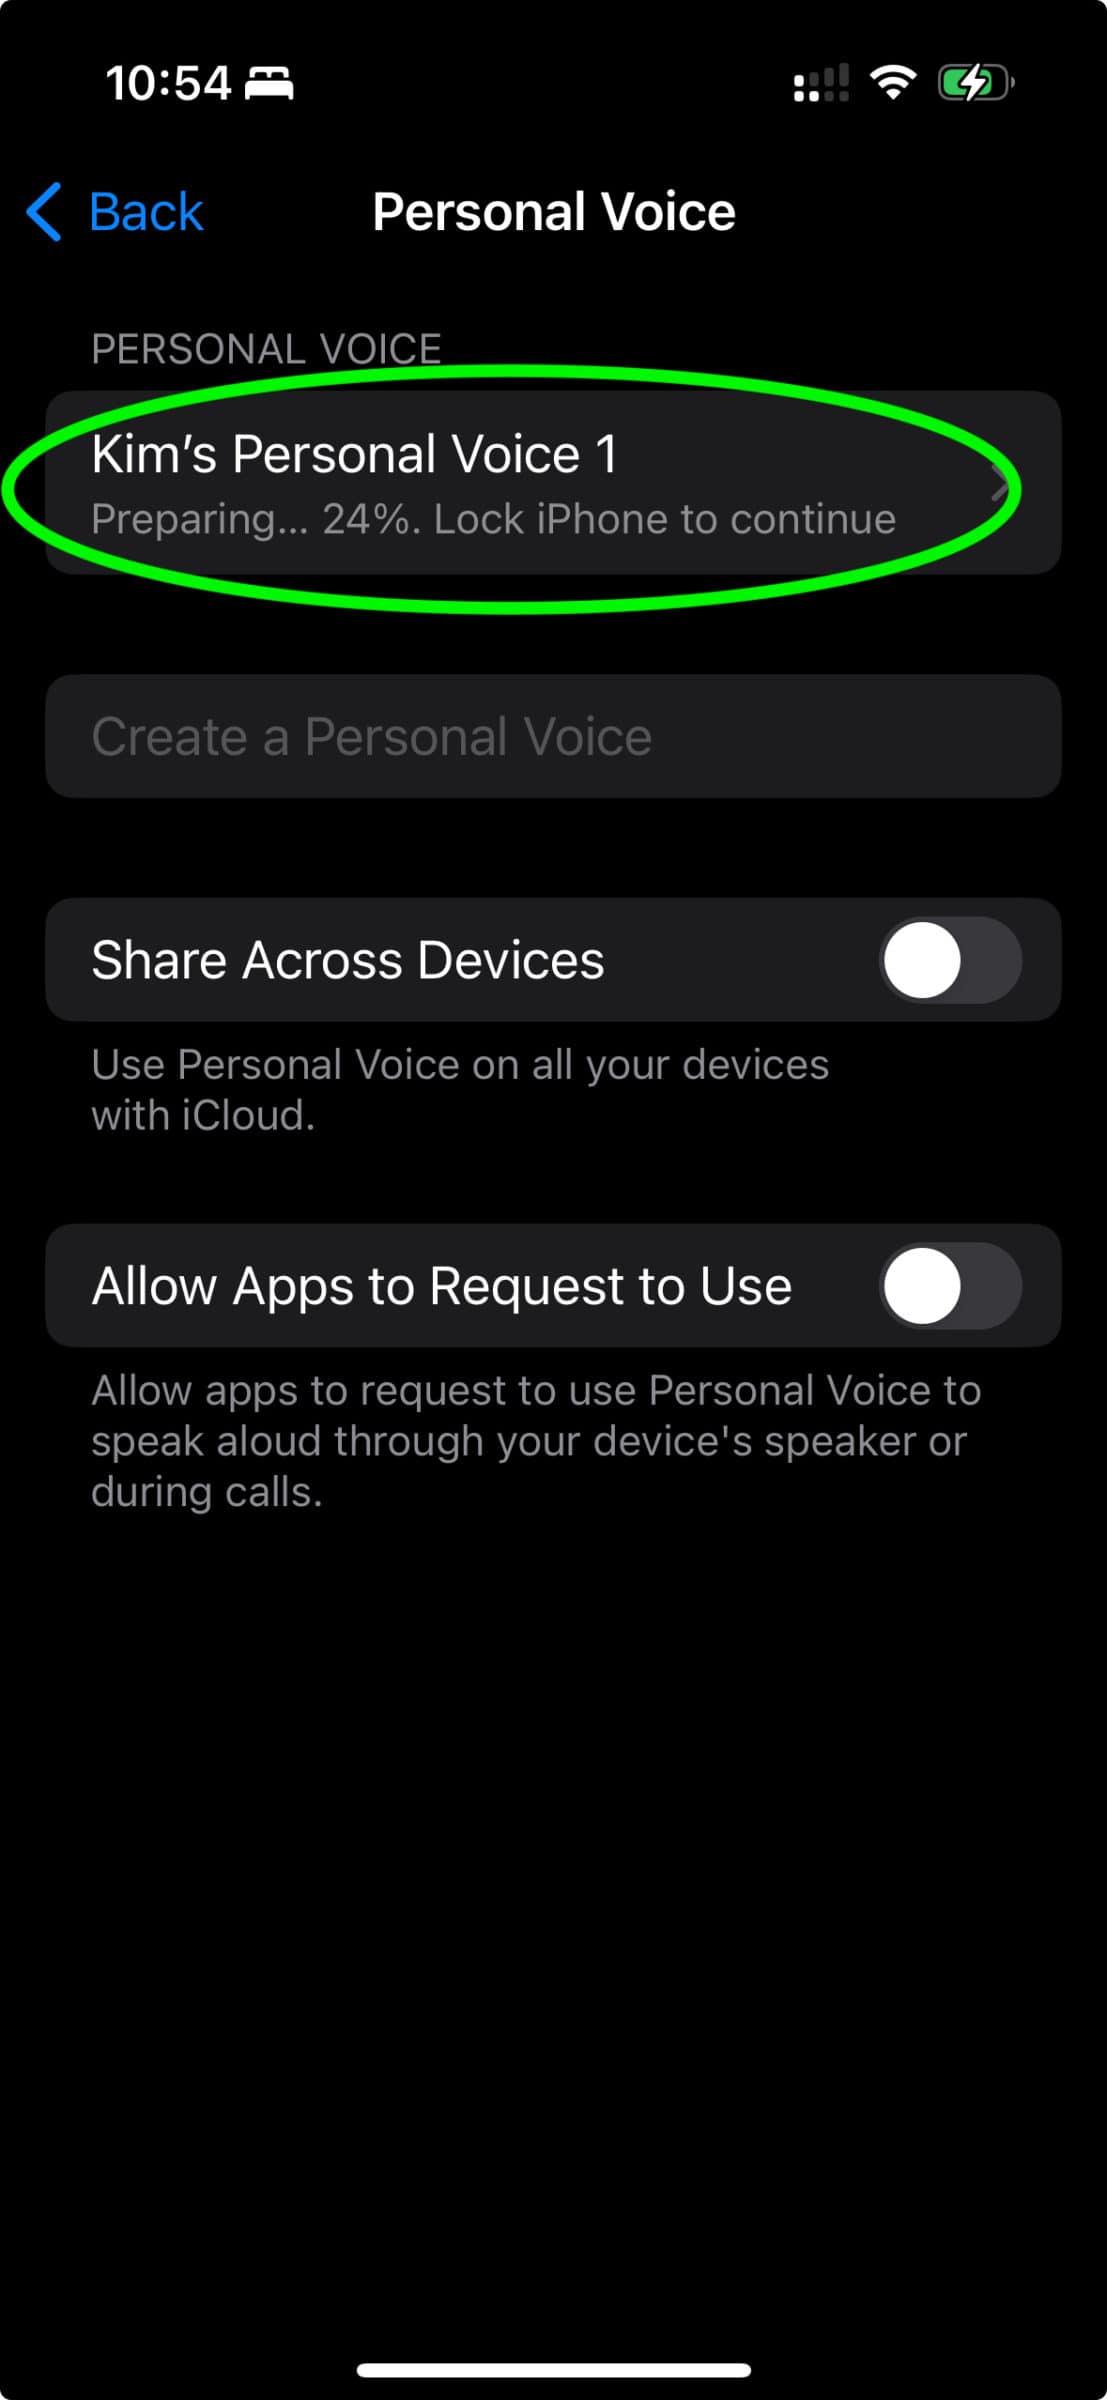 A screenshot of an iPhone showing the progress of the processing of a Personal Voice.